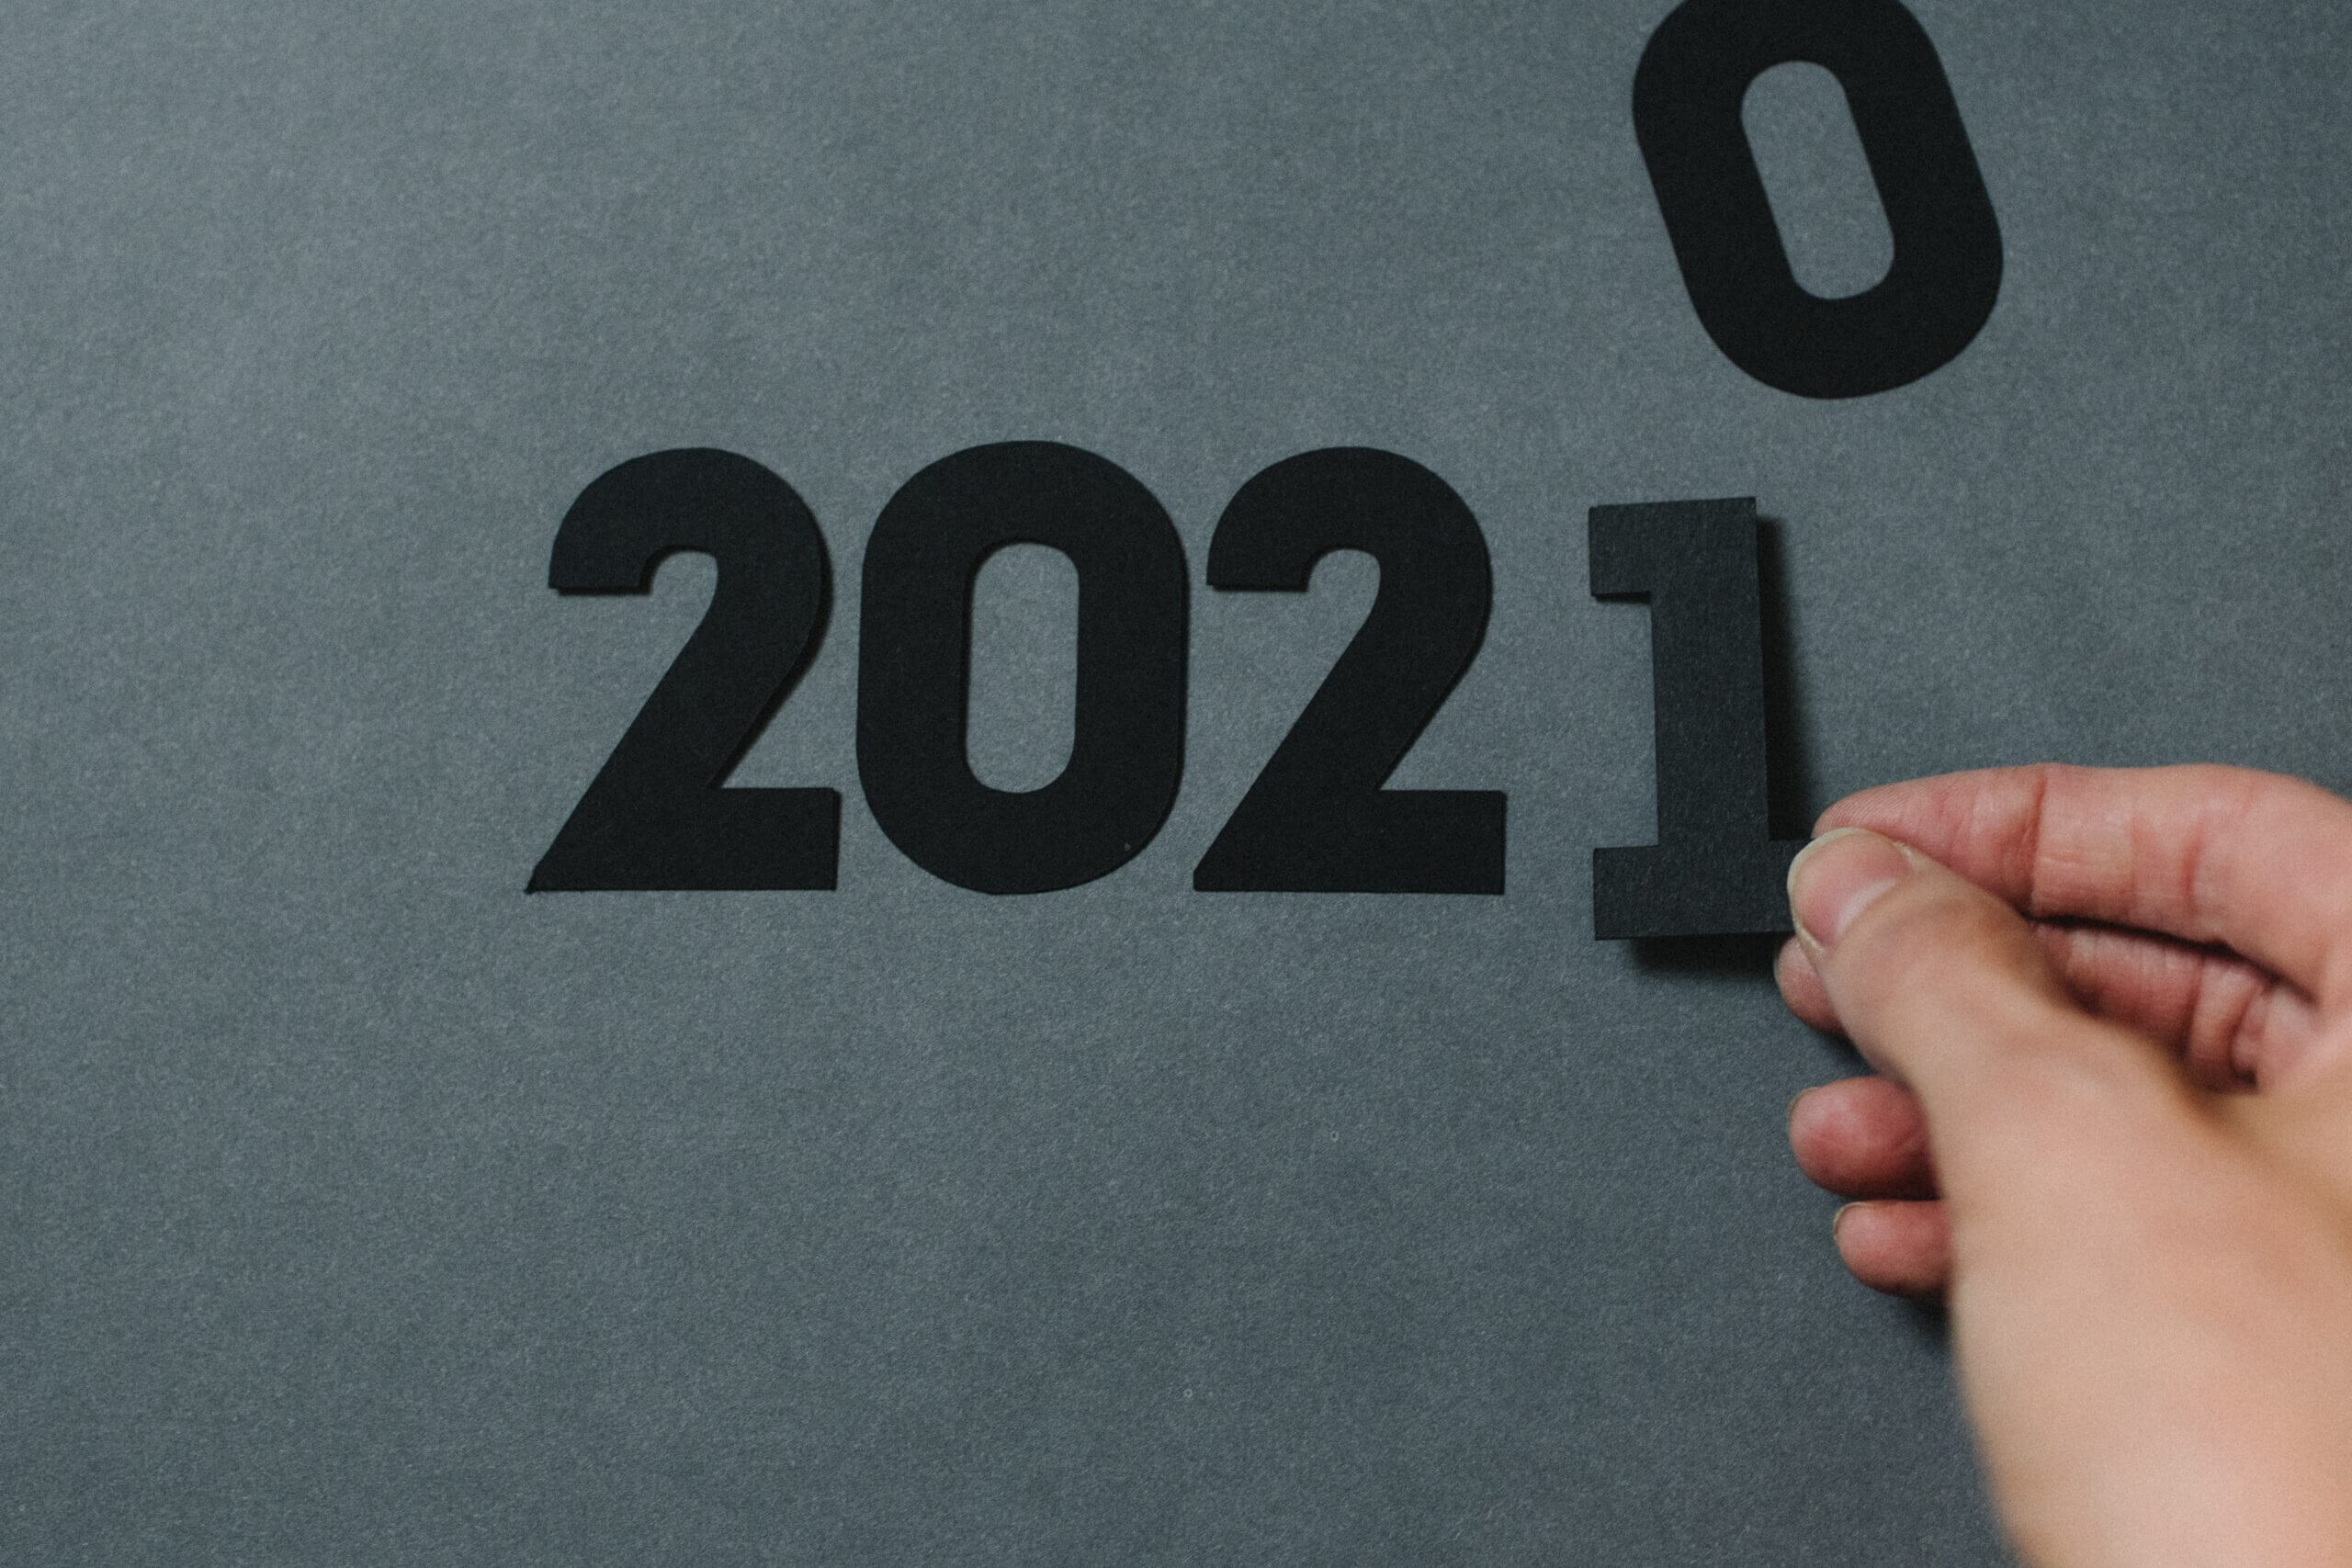 Photo of someone replacing the zero of "2020" with a one.